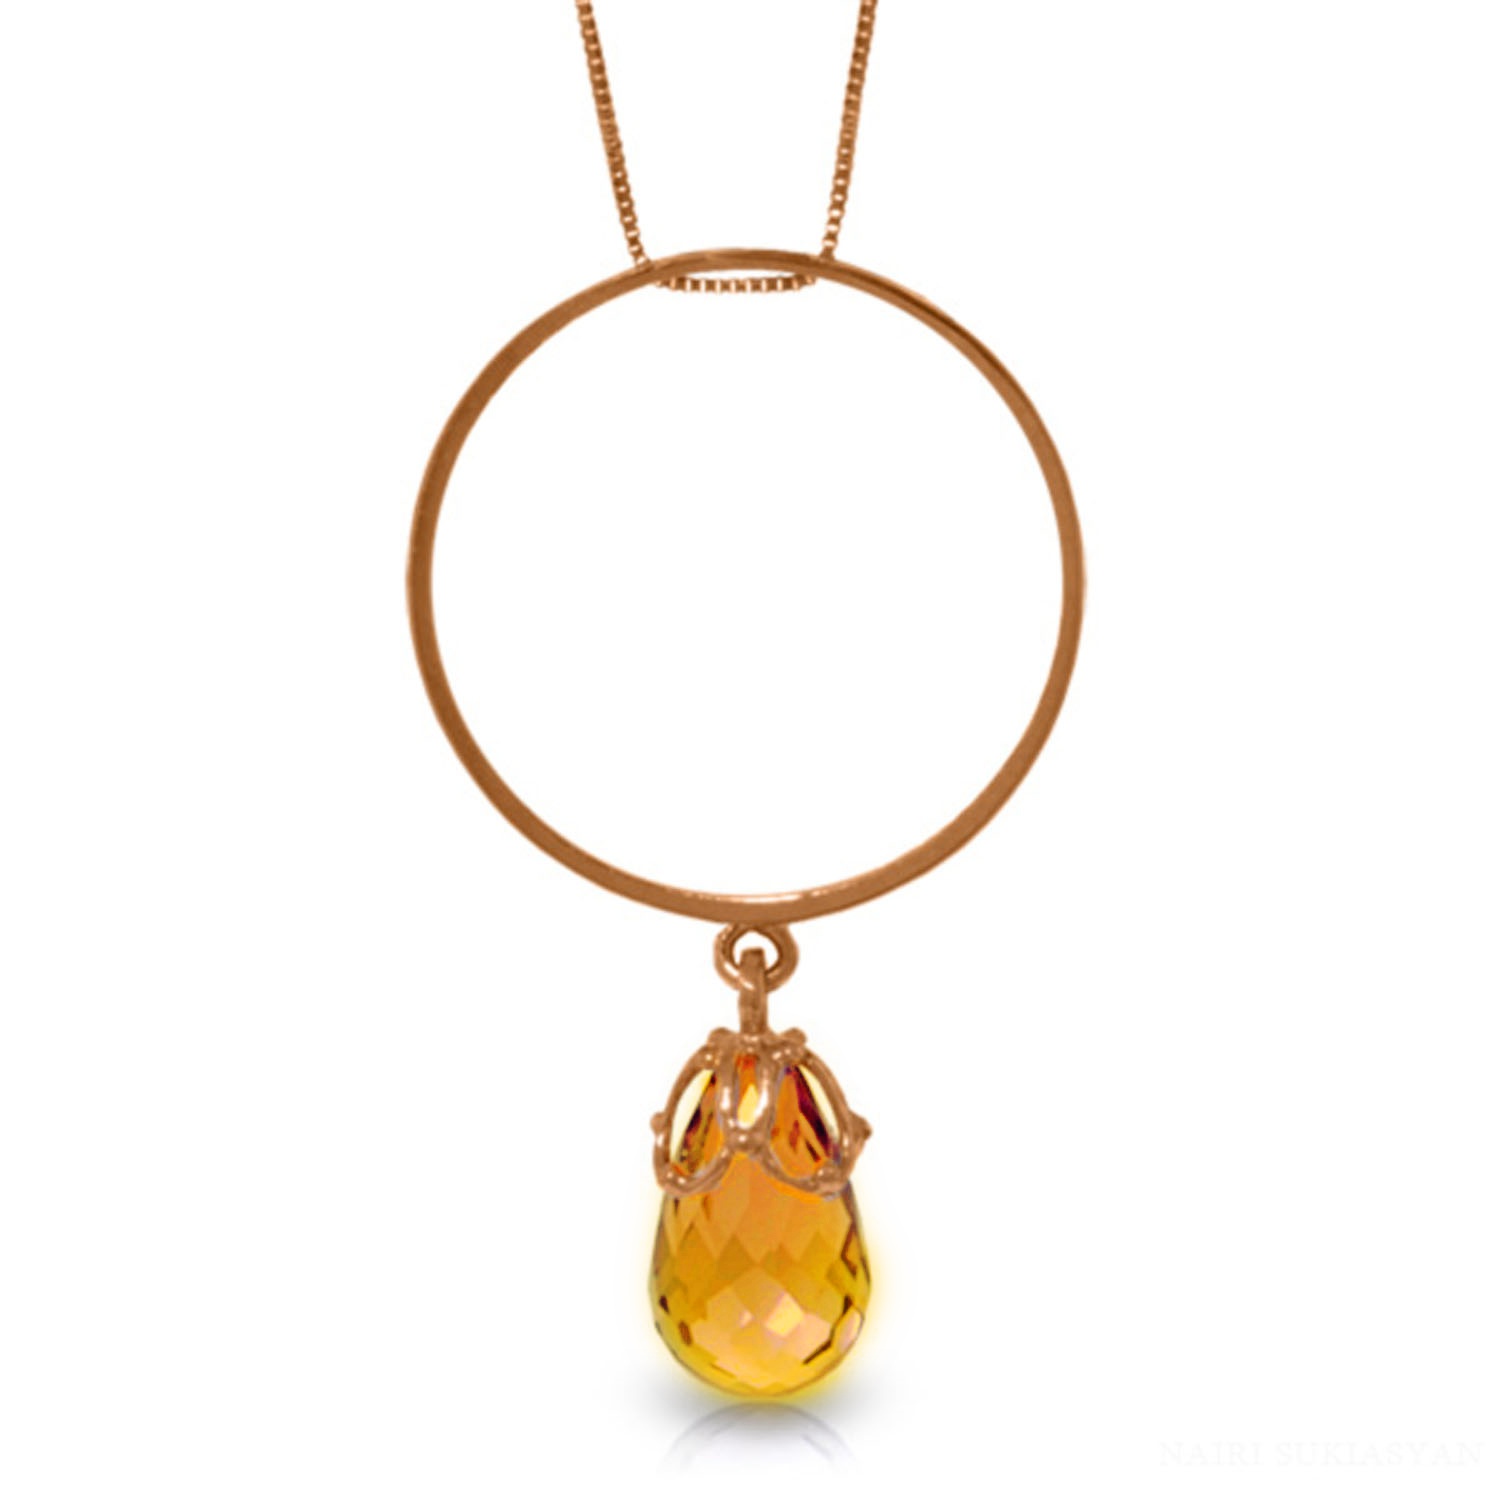 Galaxy Gold 3 Carat 14k 20" Solid Rose Gold Necklace with Natural Citrine Charm Circle Pendant - image 1 of 2